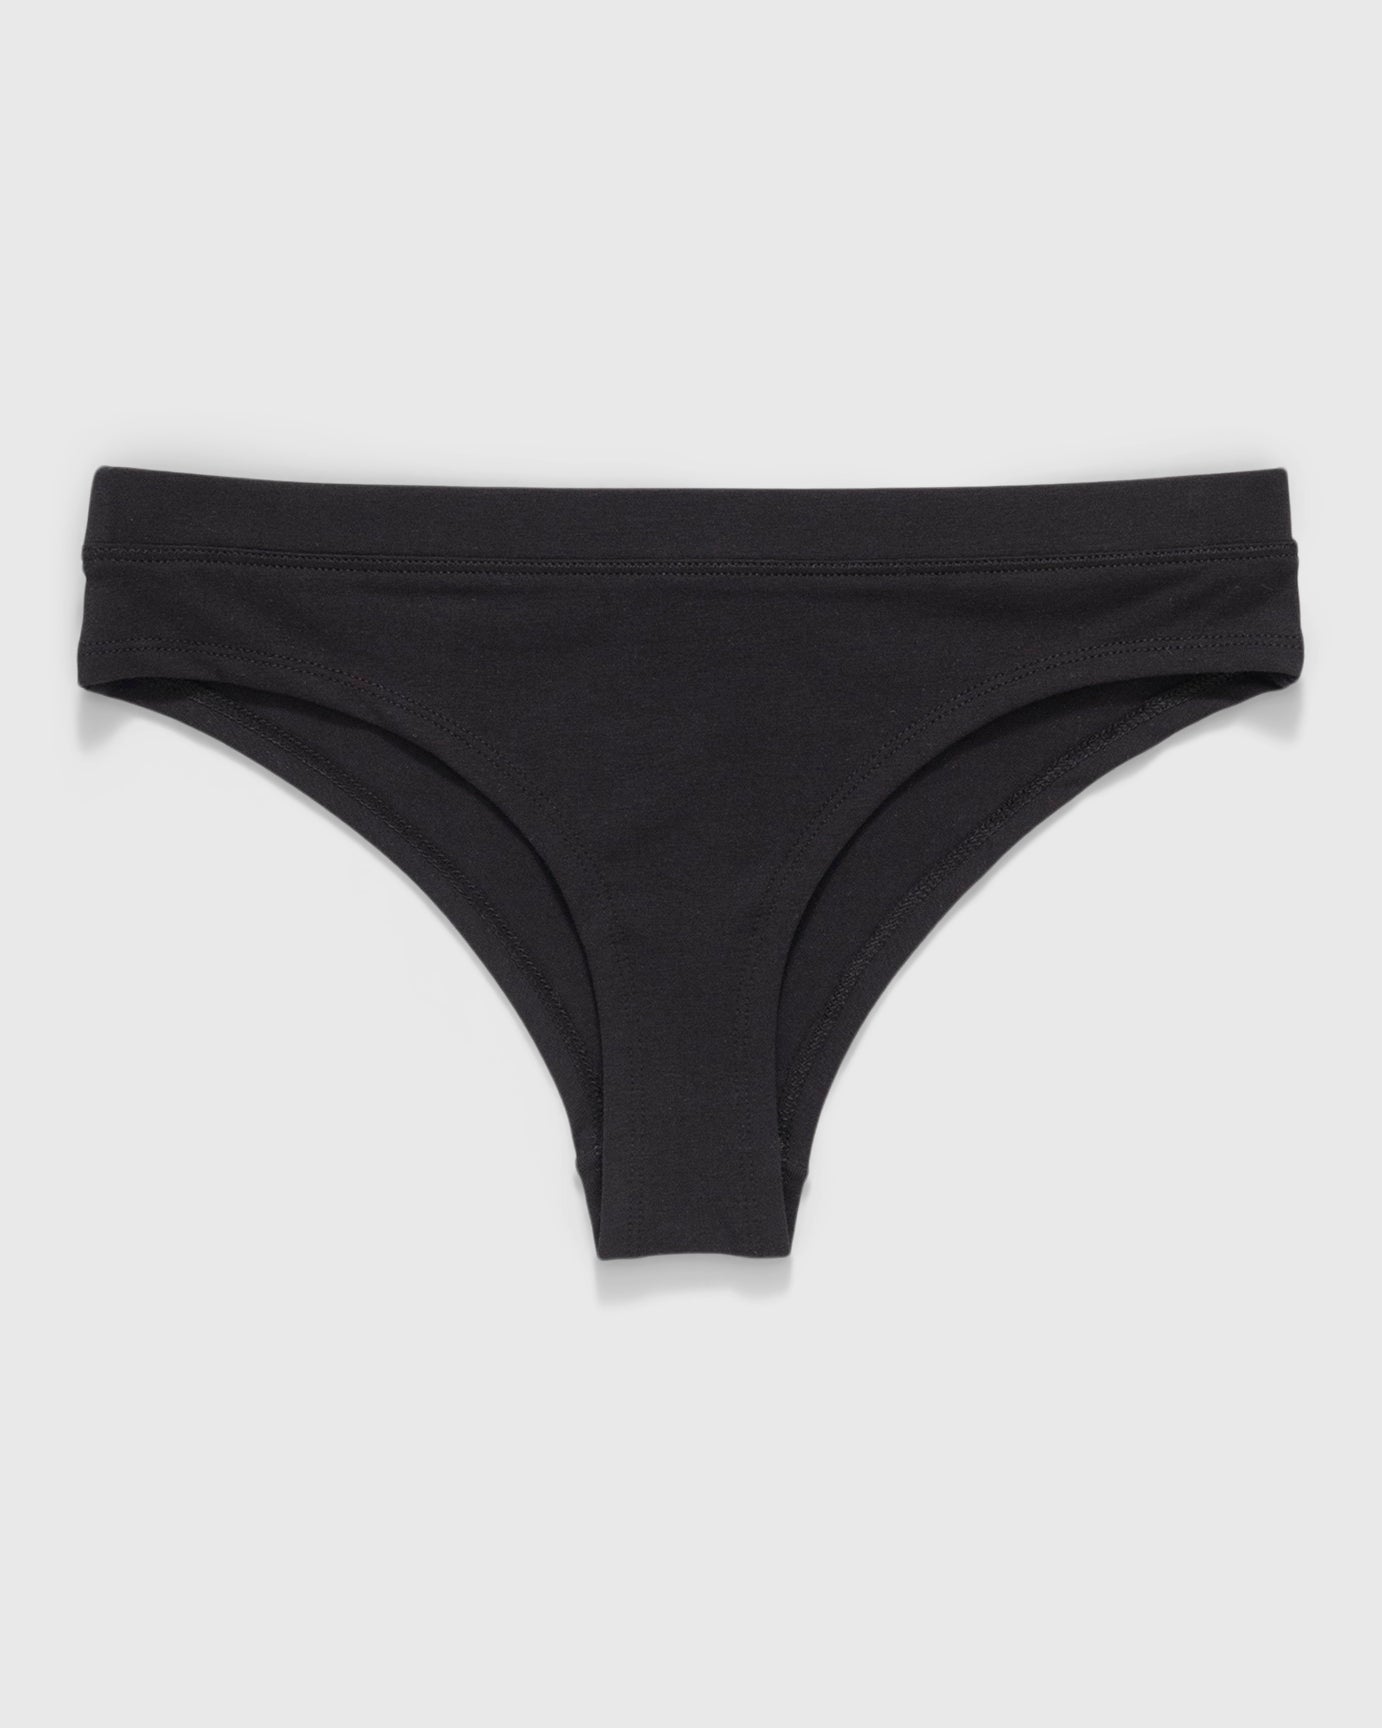 Black Clouds Undies — Organic Clothing Made in Detroit, USA